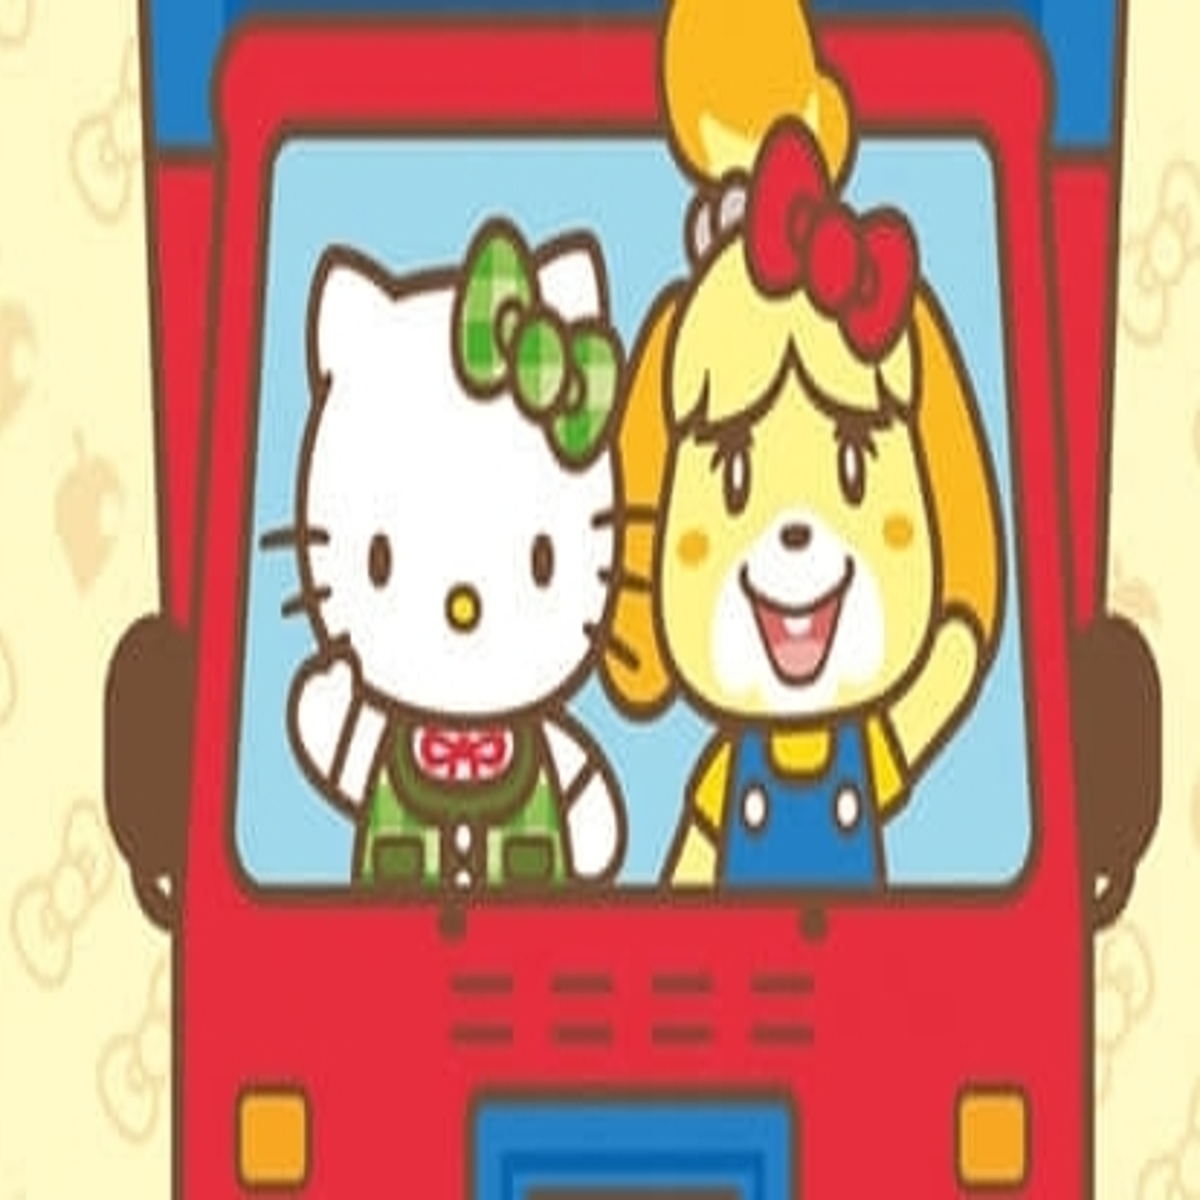 pfp, kitty and animal crossing - image #8666264 on